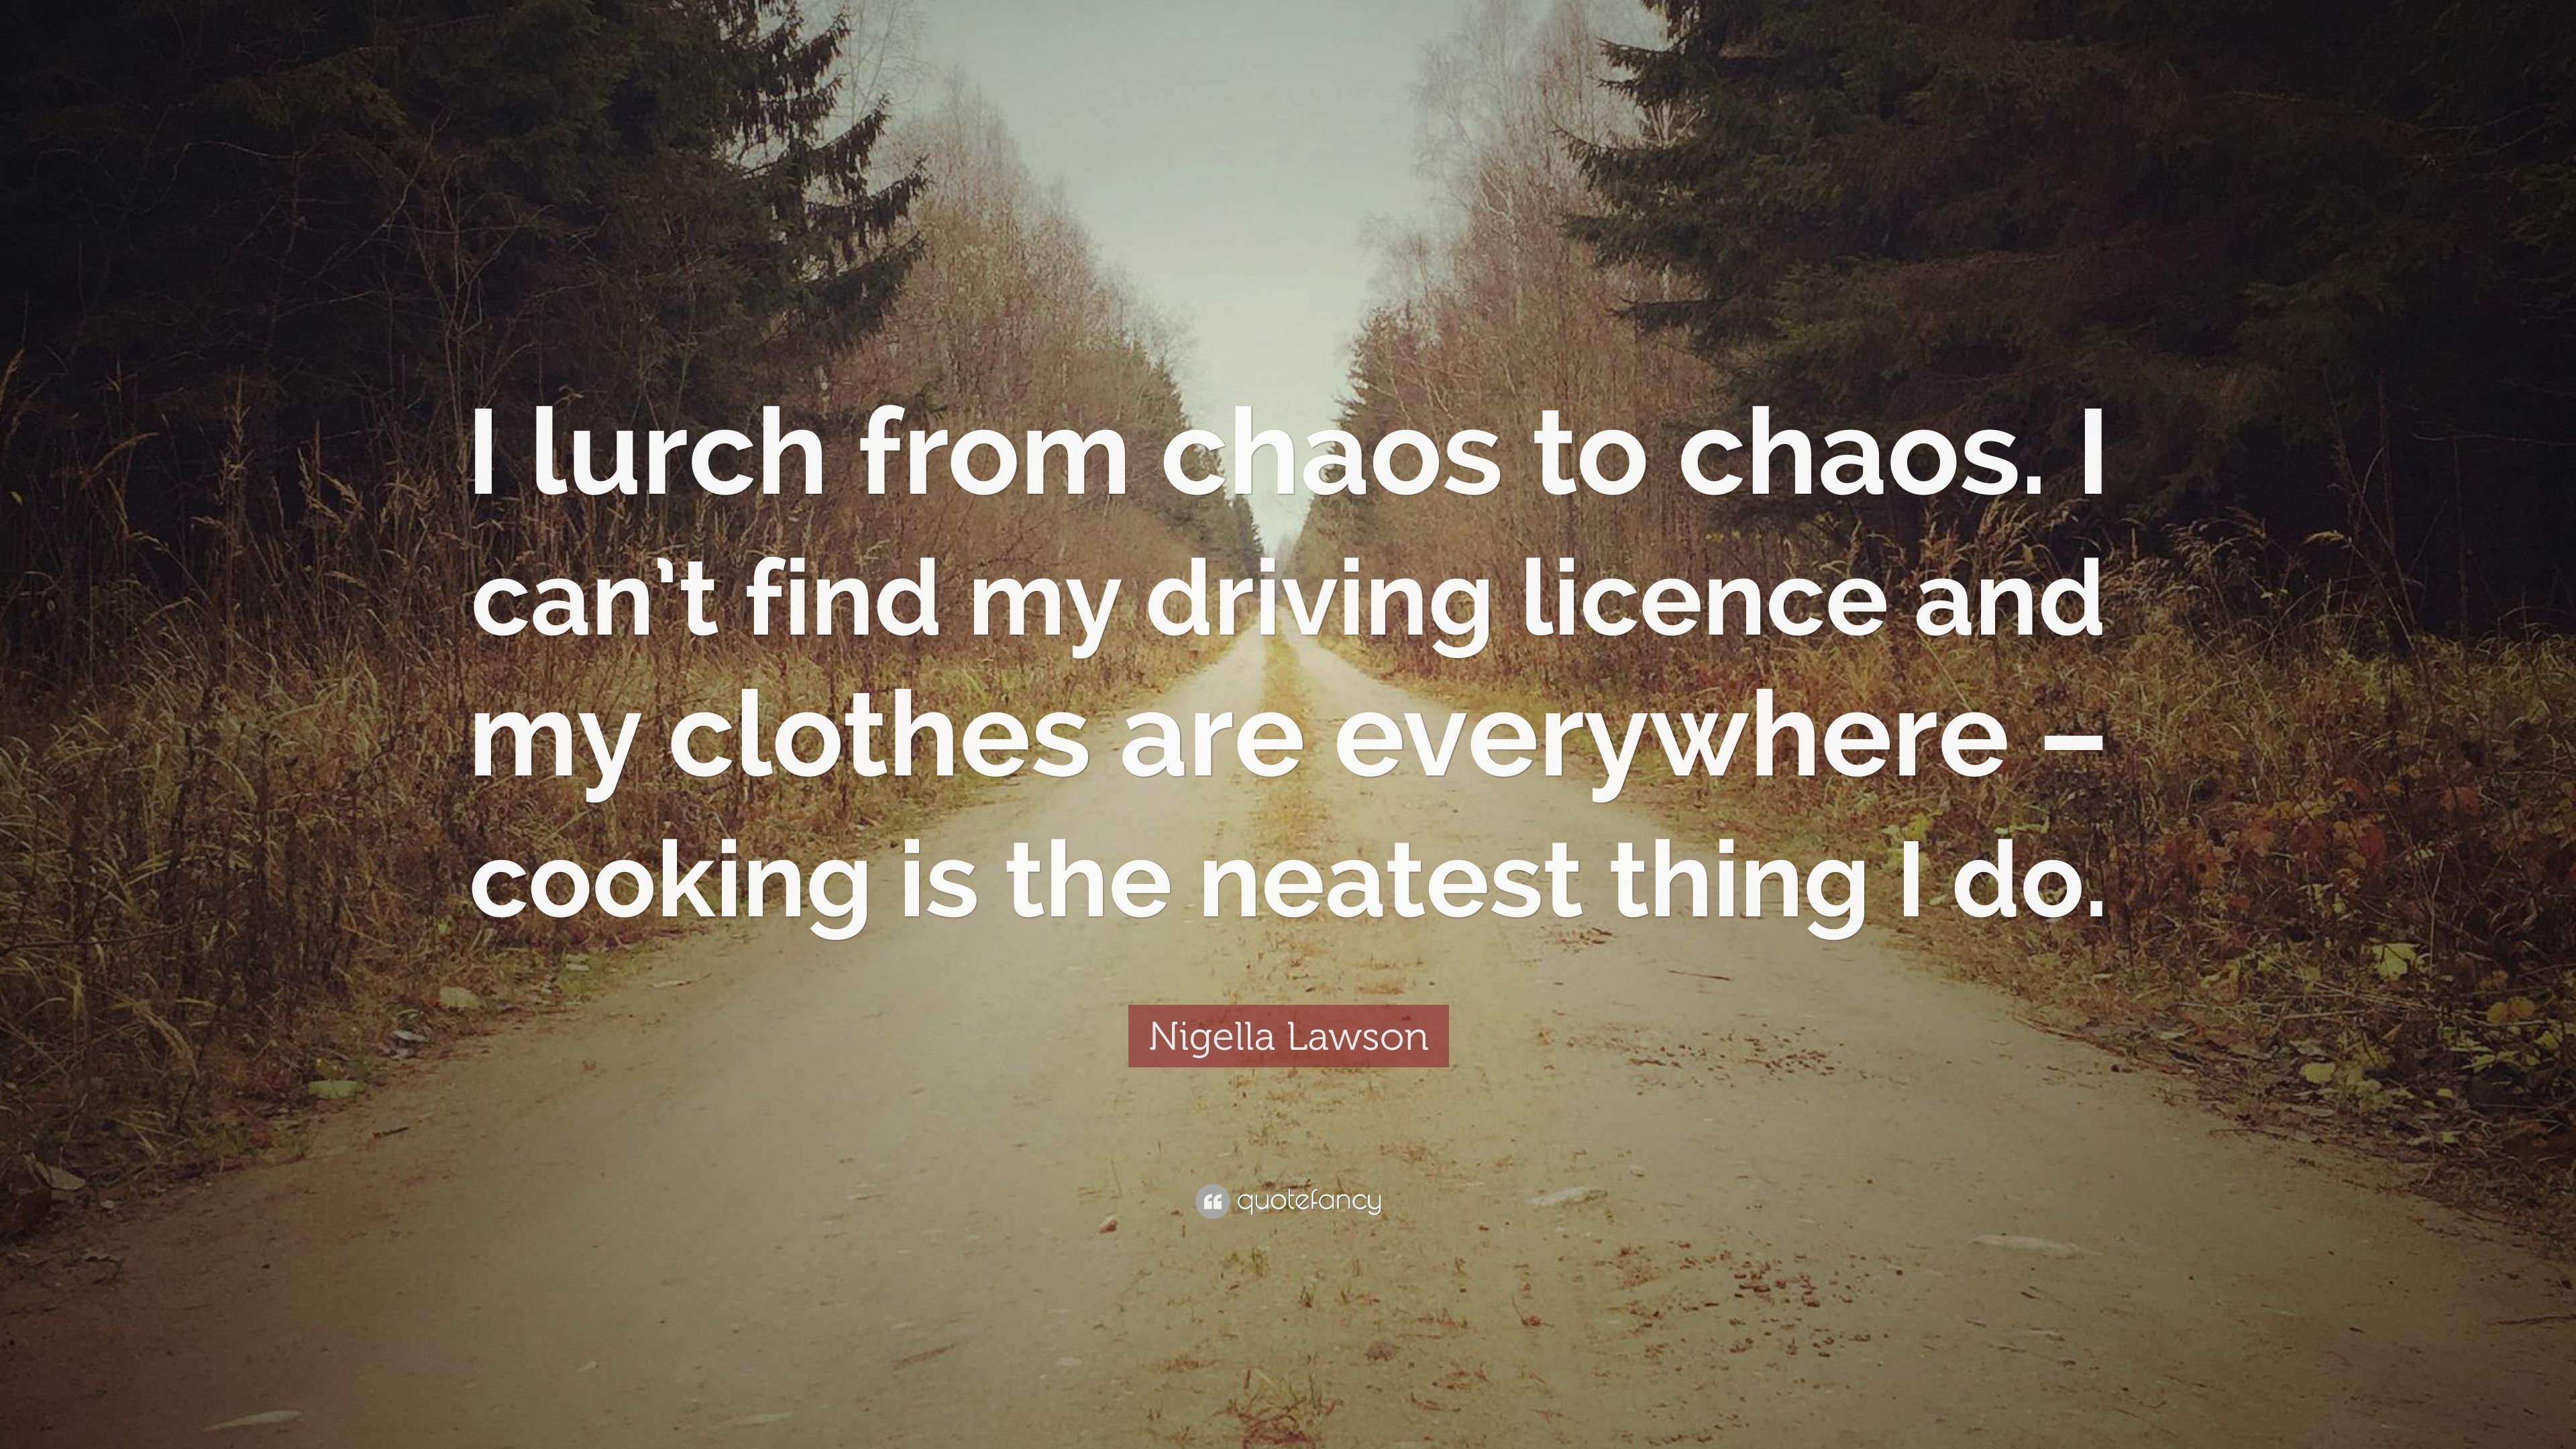 Nigella Lawson Quote: “I lurch from chaos to chaos. I can't find my driving licence and my clothes are everywhere